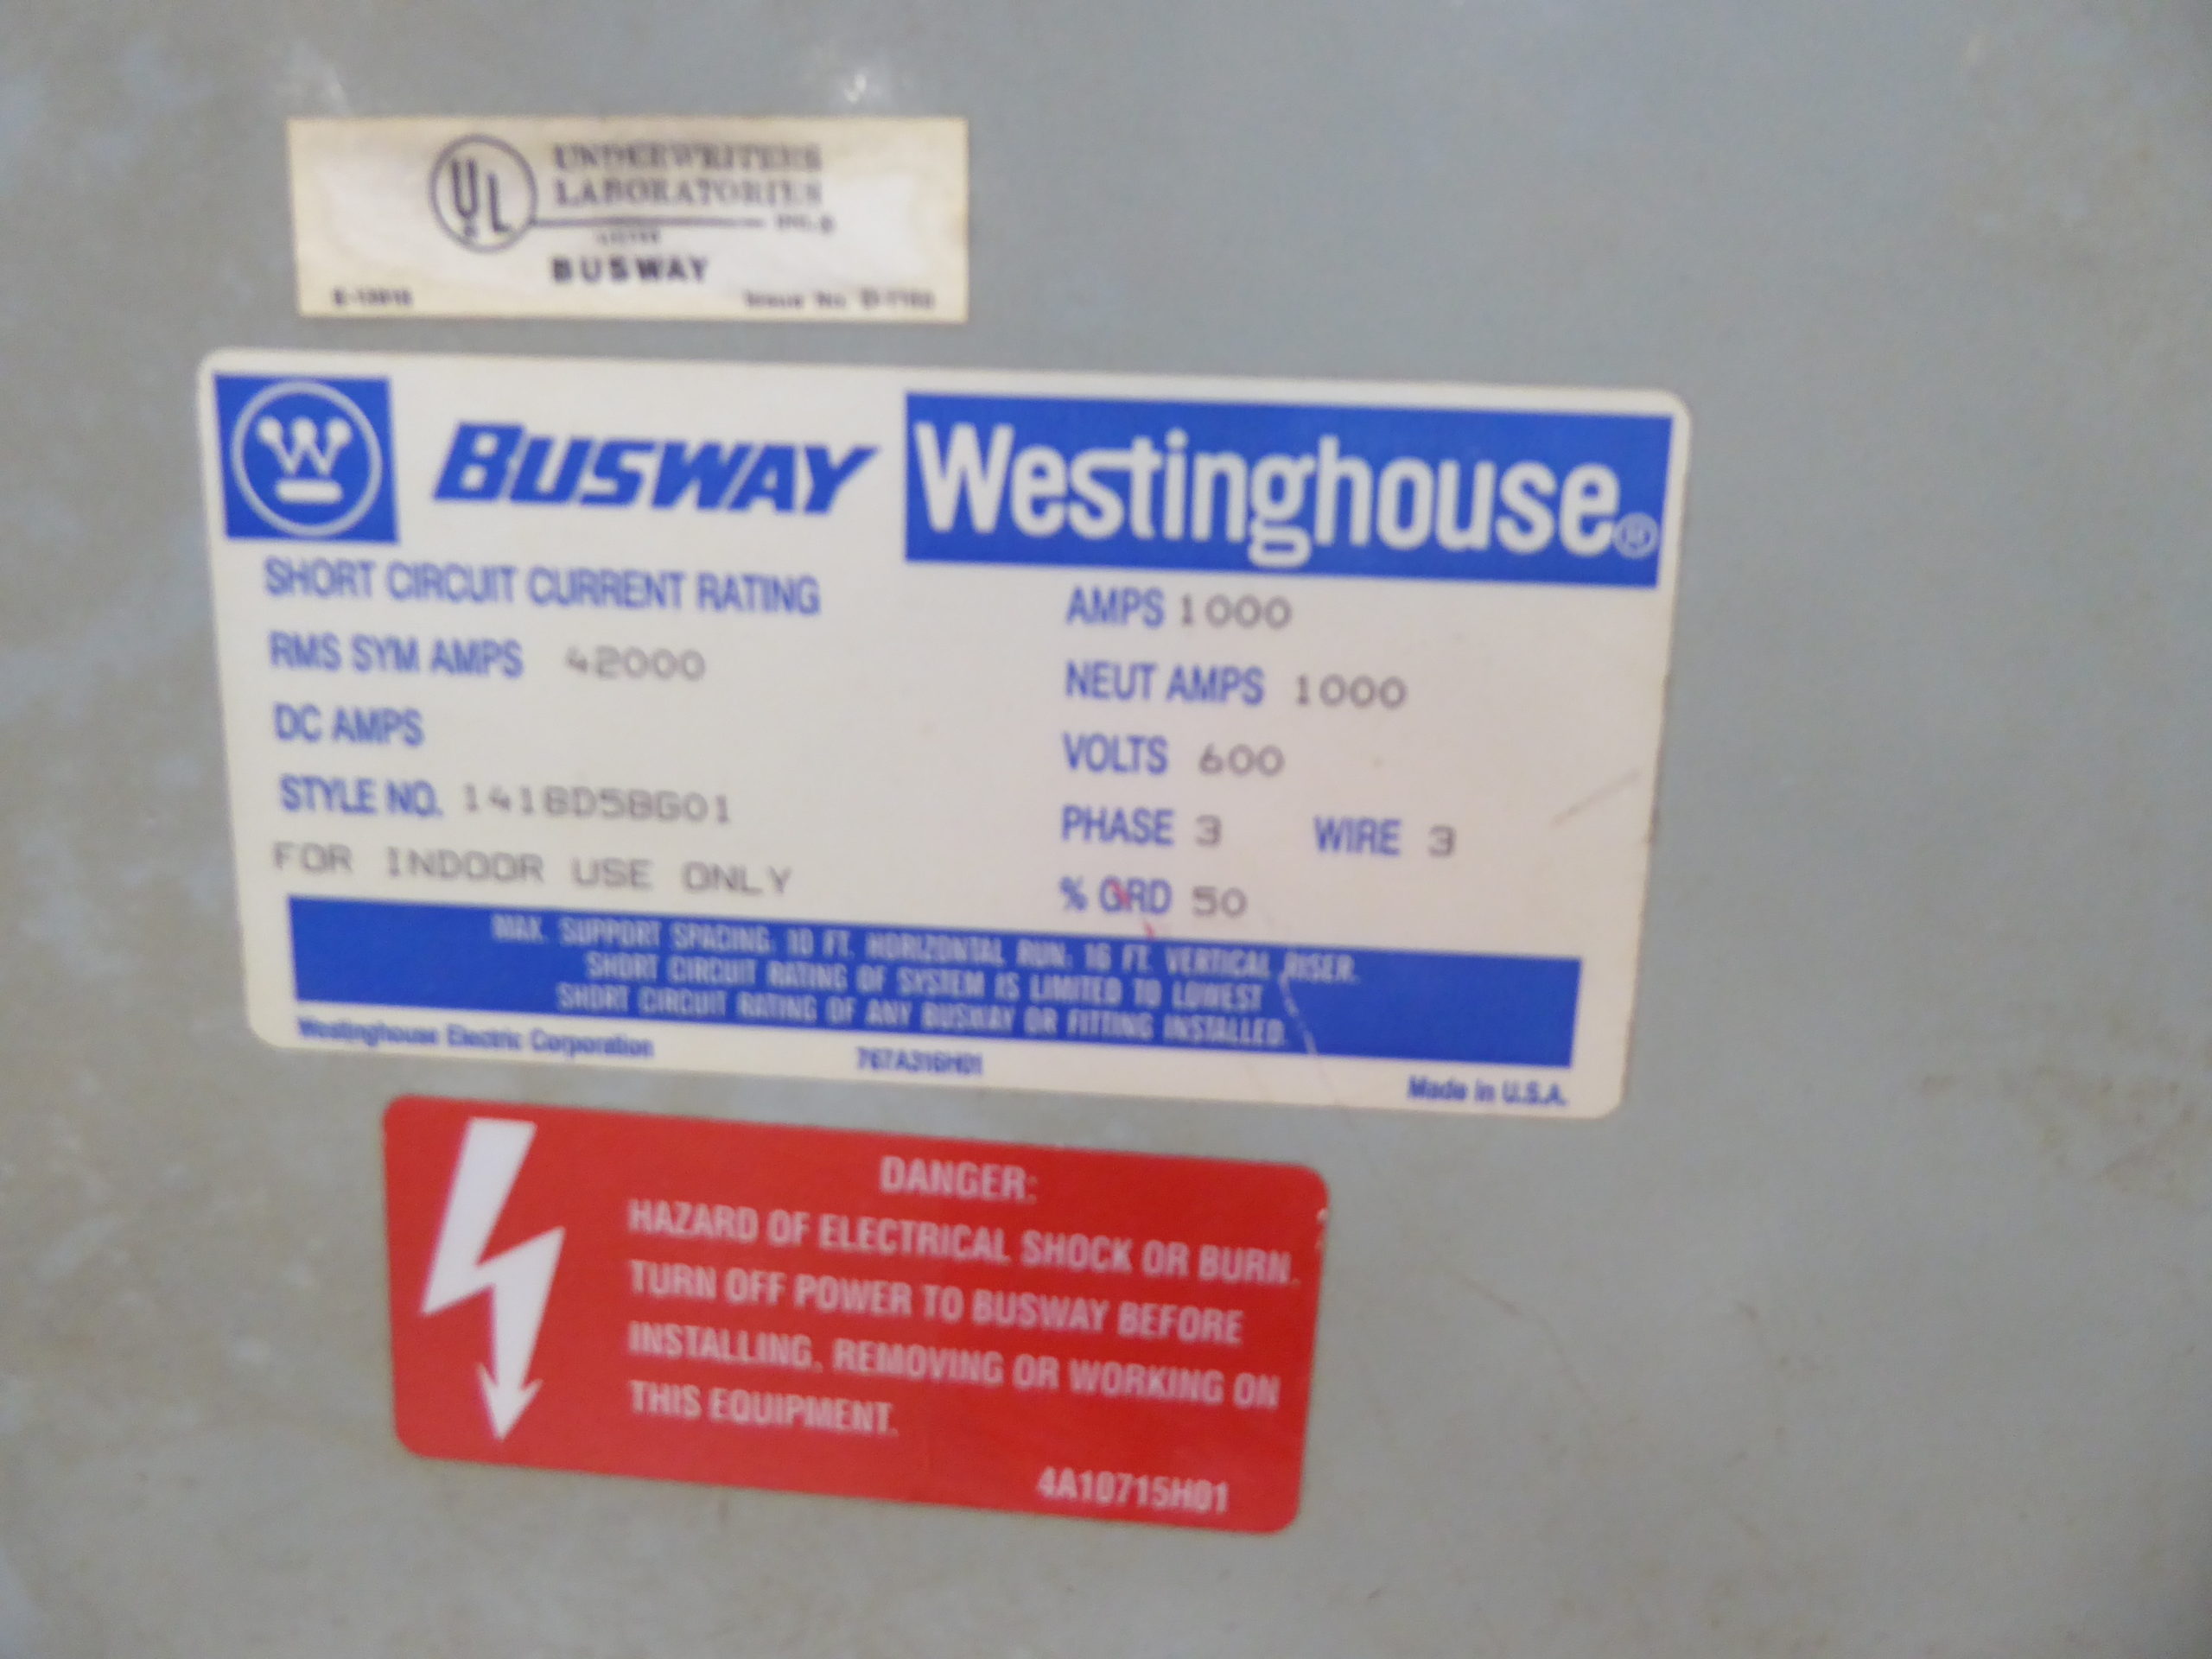 Used - Westinghouse Busway Bus Duct 1000 AMP EE2194-Electrical Equipment